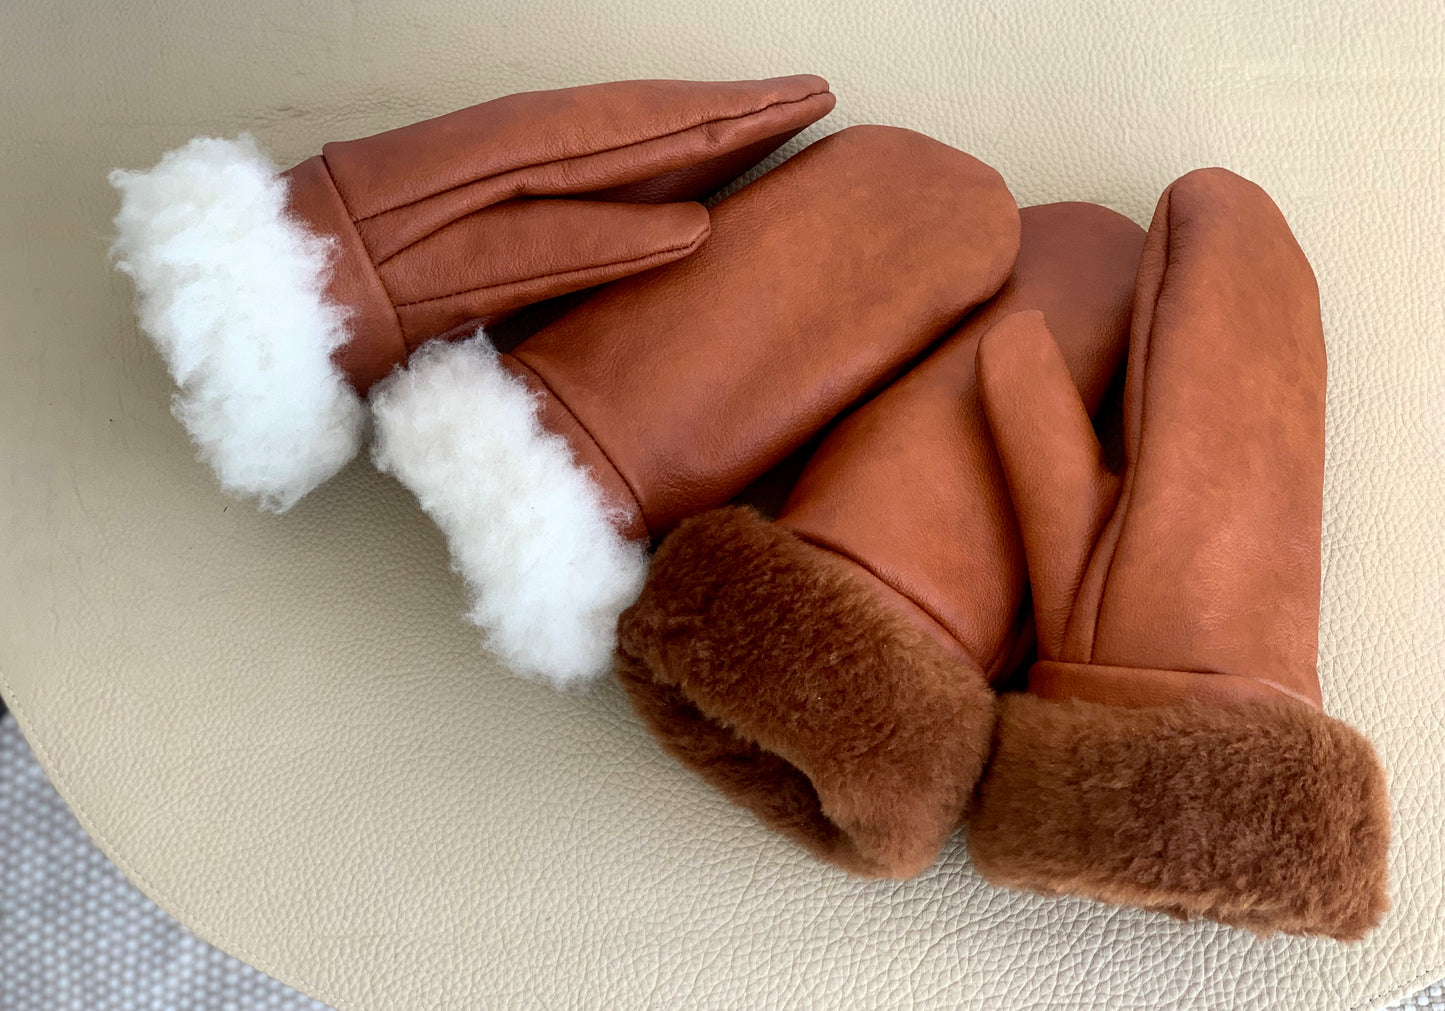 Padded leather gloves, size S-M (Color: COGNAC)